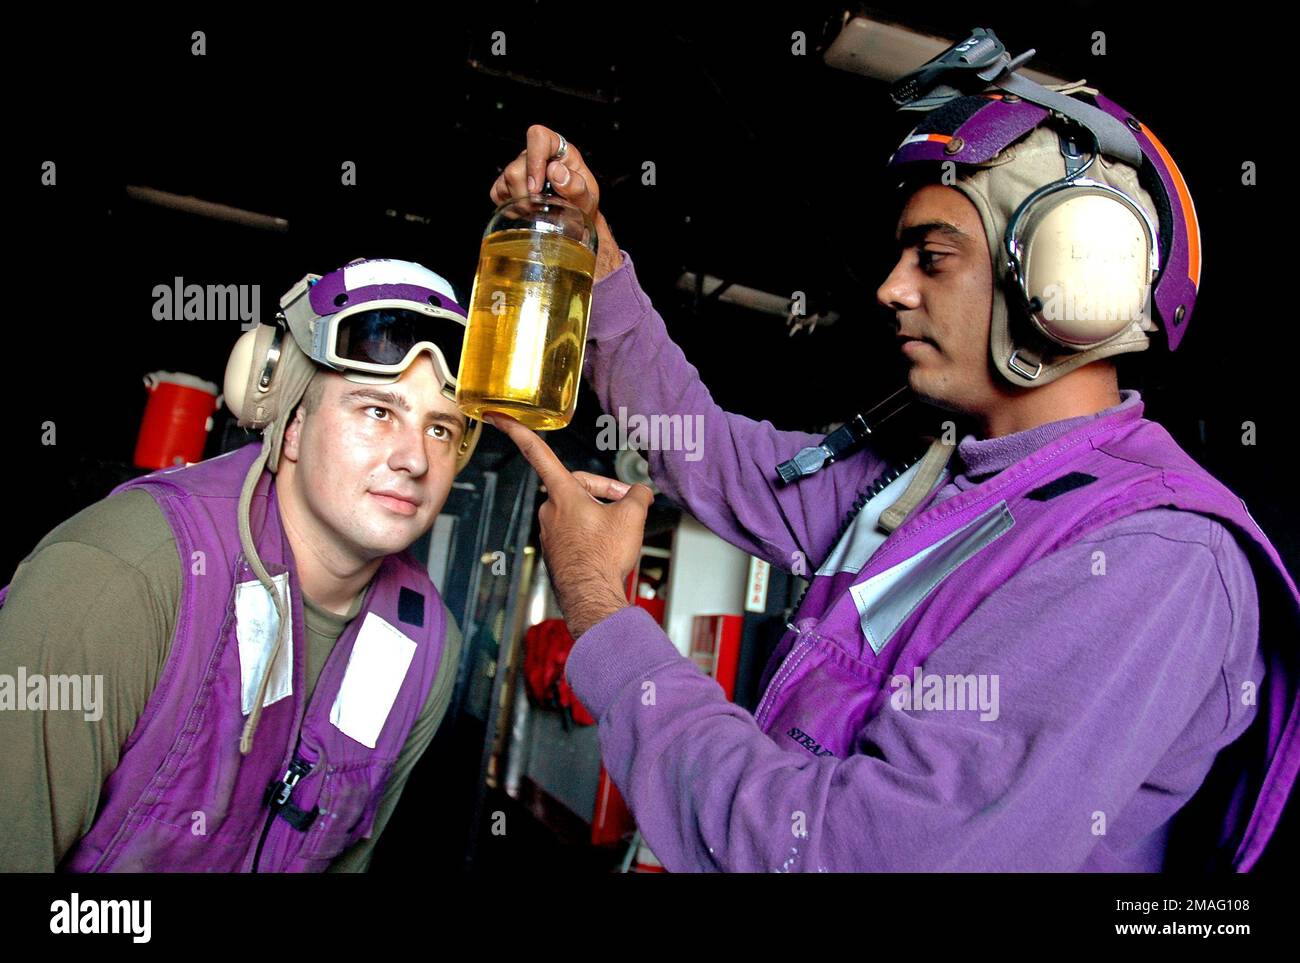 060813-N-5914D-006. [Complete] Scene Caption: 060813-N-5914D-006 (Aug. 13, 2006)US Navy (USN) Aviation Boatswain's Mate Fuels Third Class Rahim Panjwani (right) and US Marine Corps (USMC) Lance CPL. Gene Palmer, Bulk Fueler, Marine Medium Helicopter Squaron 165 (HMM-165) Reinforced (REIN), 15th Marine Expeditionary Unit (MEU), inspect the purity of jet fuel that will be used by aircraft aboard the USN Wasp Class Amphibious Assault Ship (LHD) USS BOXER (LHD 4). The 15th MEU and the BOXER are part of Expeditionary Strike Group 5 (ESG-5) which is currently participating in their Joint Task Force Stock Photo